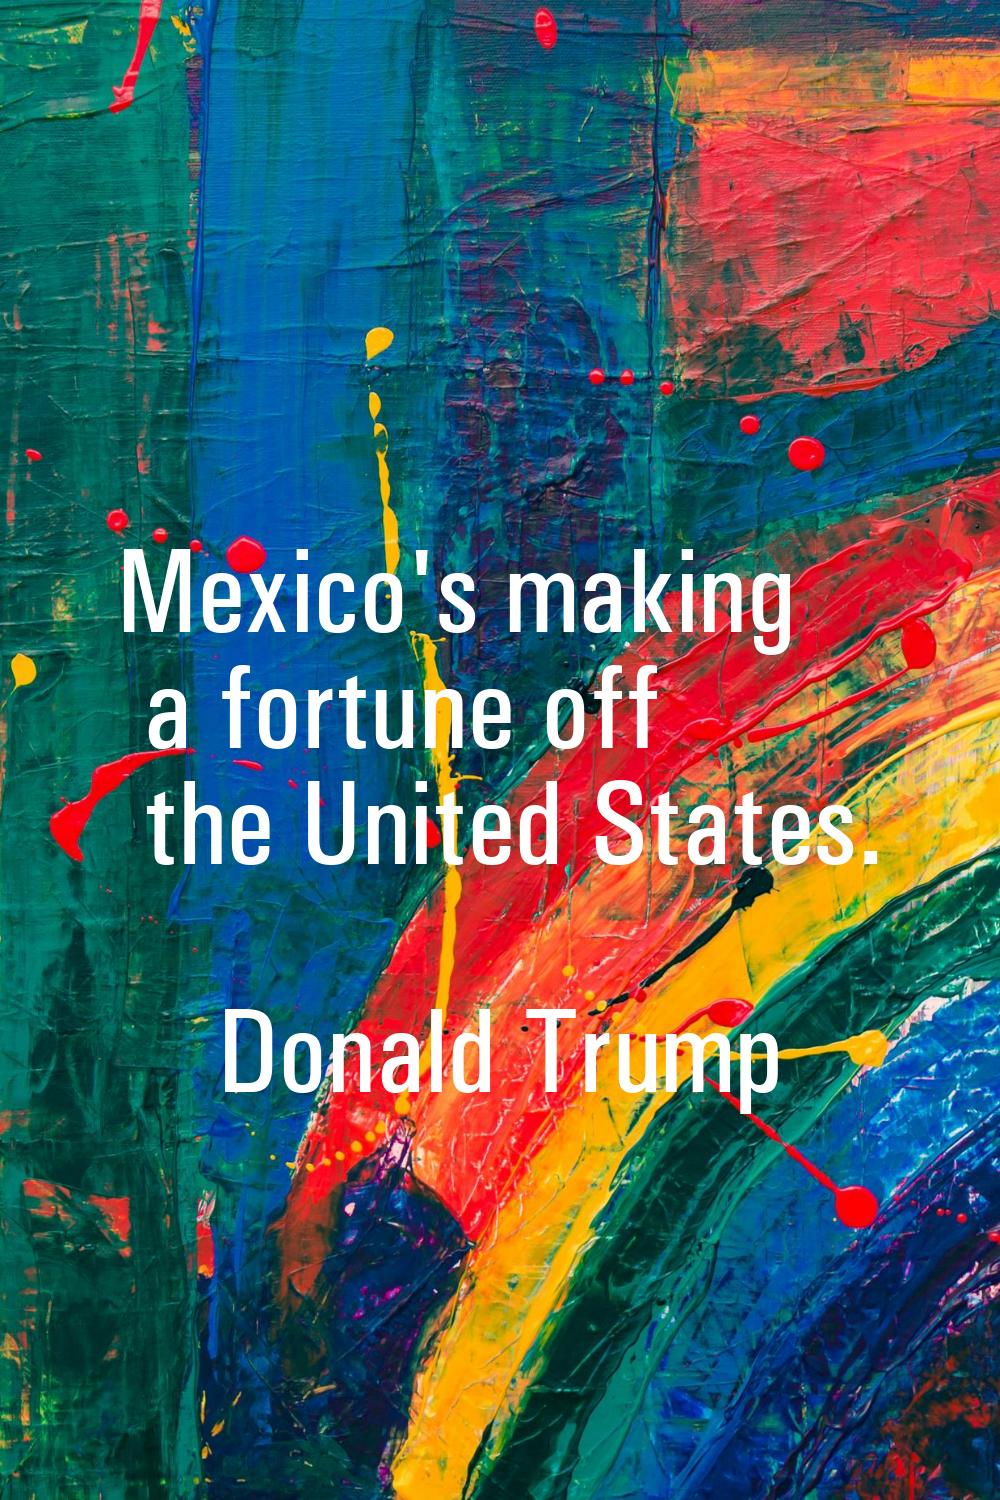 Mexico's making a fortune off the United States.